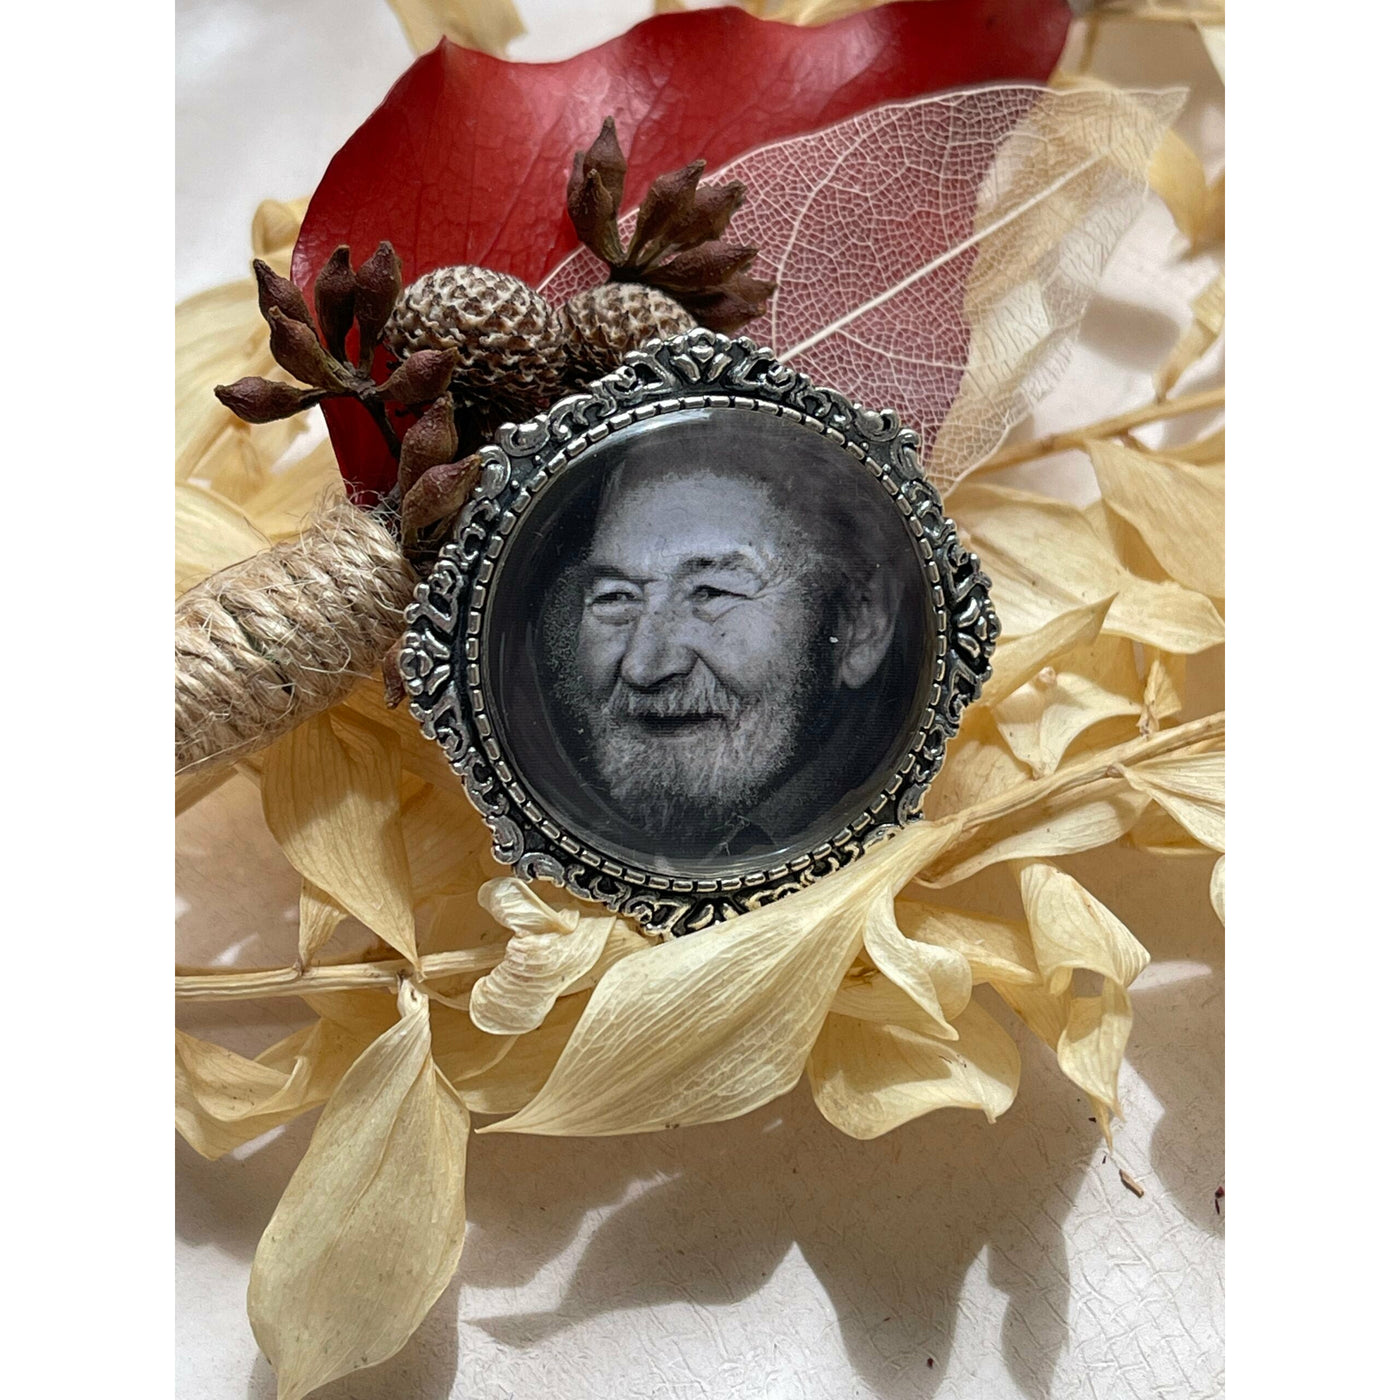 A memorial brooch or memorial pin in the design called Lace showing a photo of a grandfather. The pin is attached to a boutonniere of dried Australian native flowers and is intended to be pinned to a wedding bouquet or wedding jacket to include a deceased relative on your wedding day.